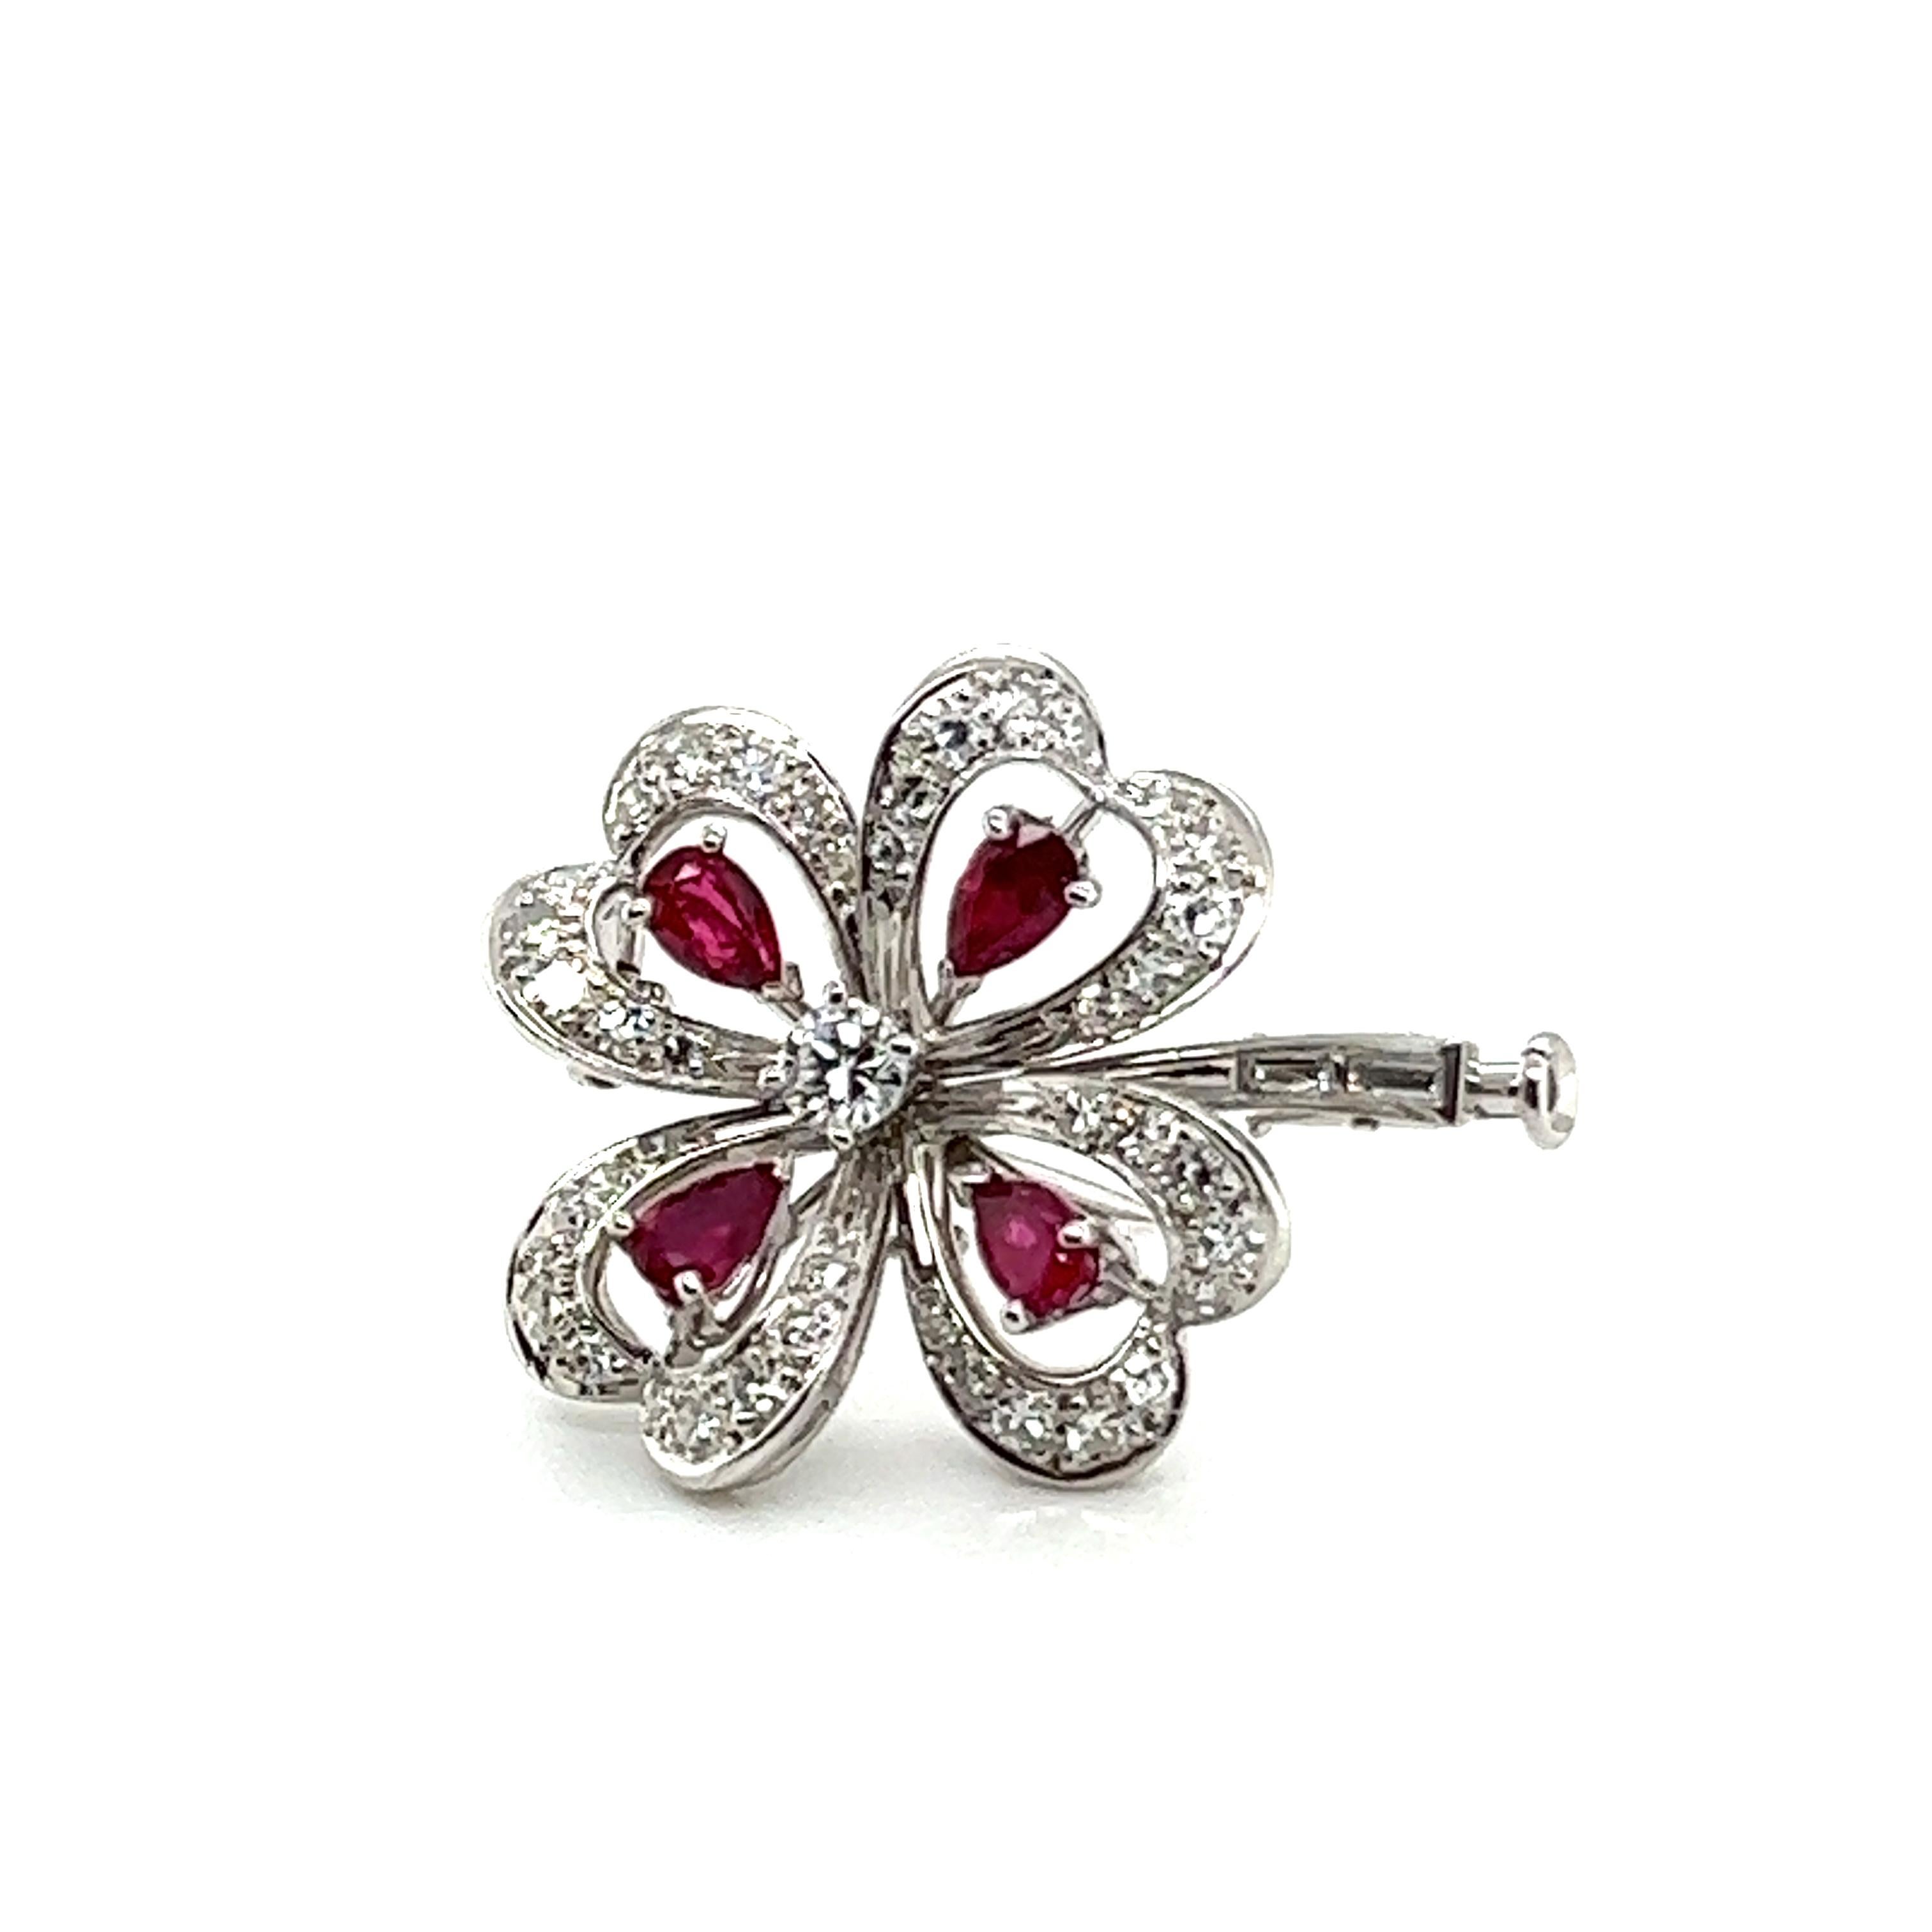 Clover Brooch with Rubies & Diamonds in 18 Karat White Gold by Meister 7